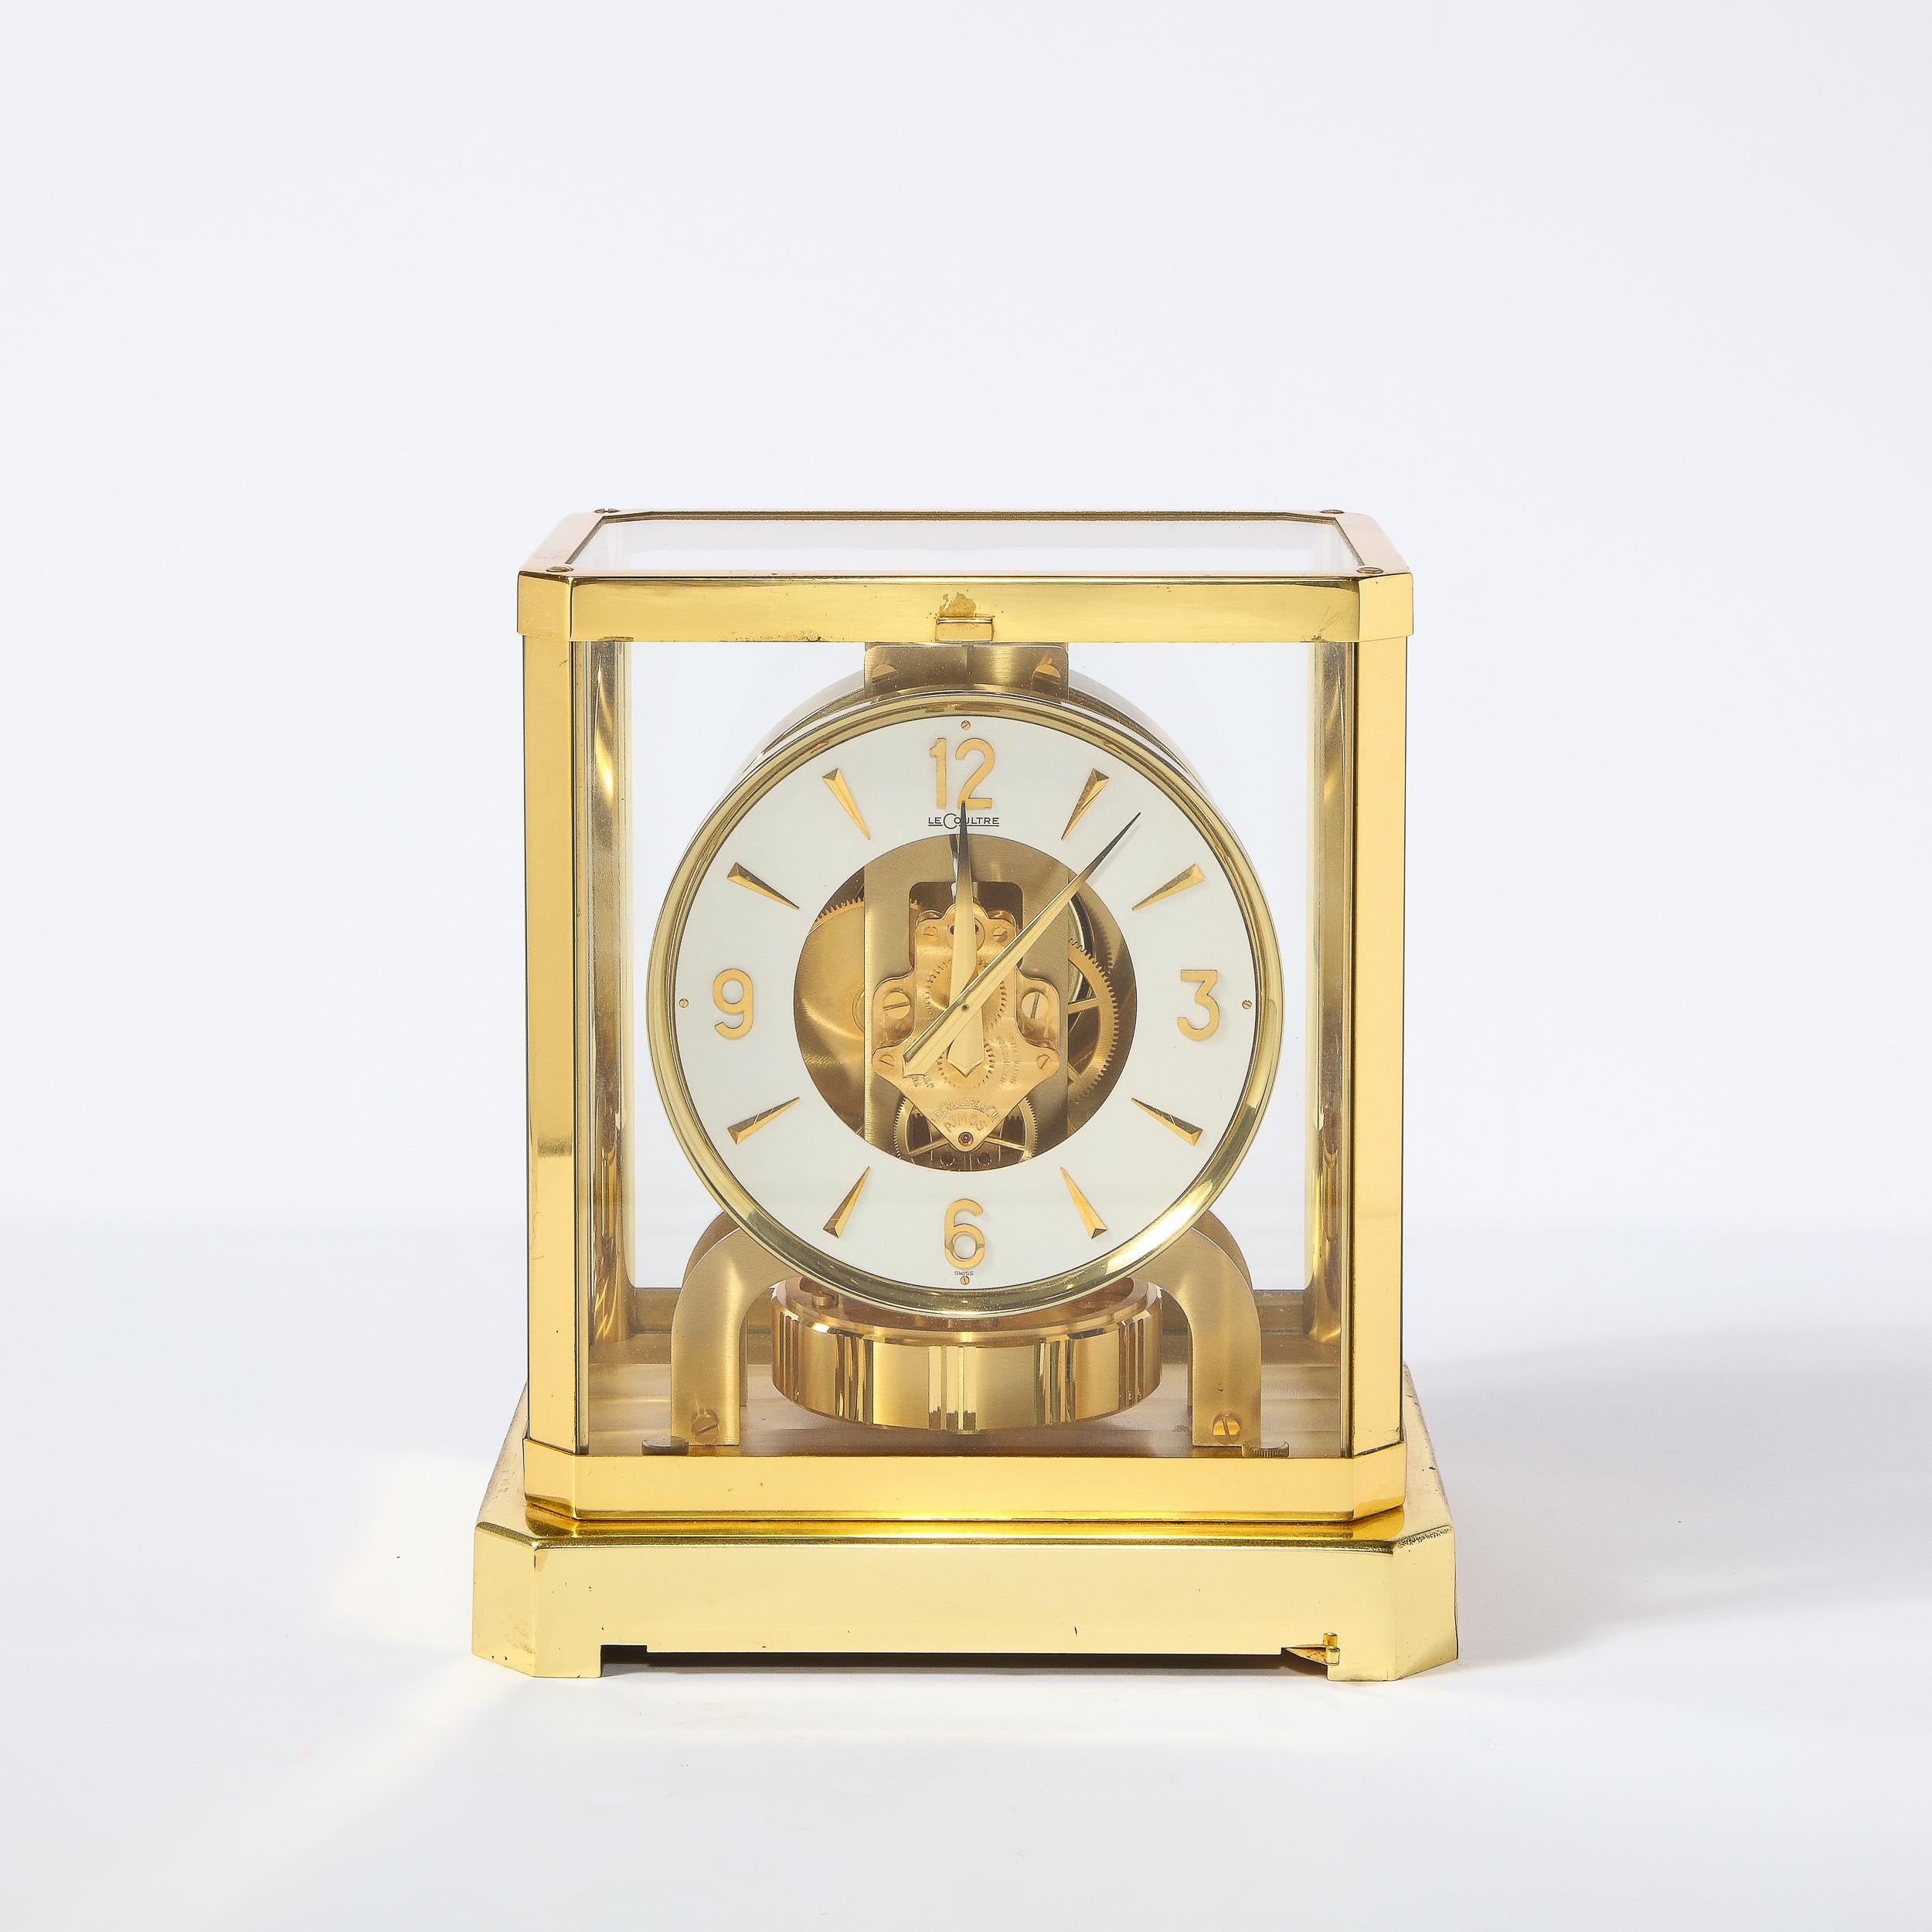 This stunning modernist desk clock was realized by the fabled Swiss watch maker Jaeger Le-Coultre. It features a polished brass open frame body with translucent glass walls that surround the clock. The clock features a white dial with markers and